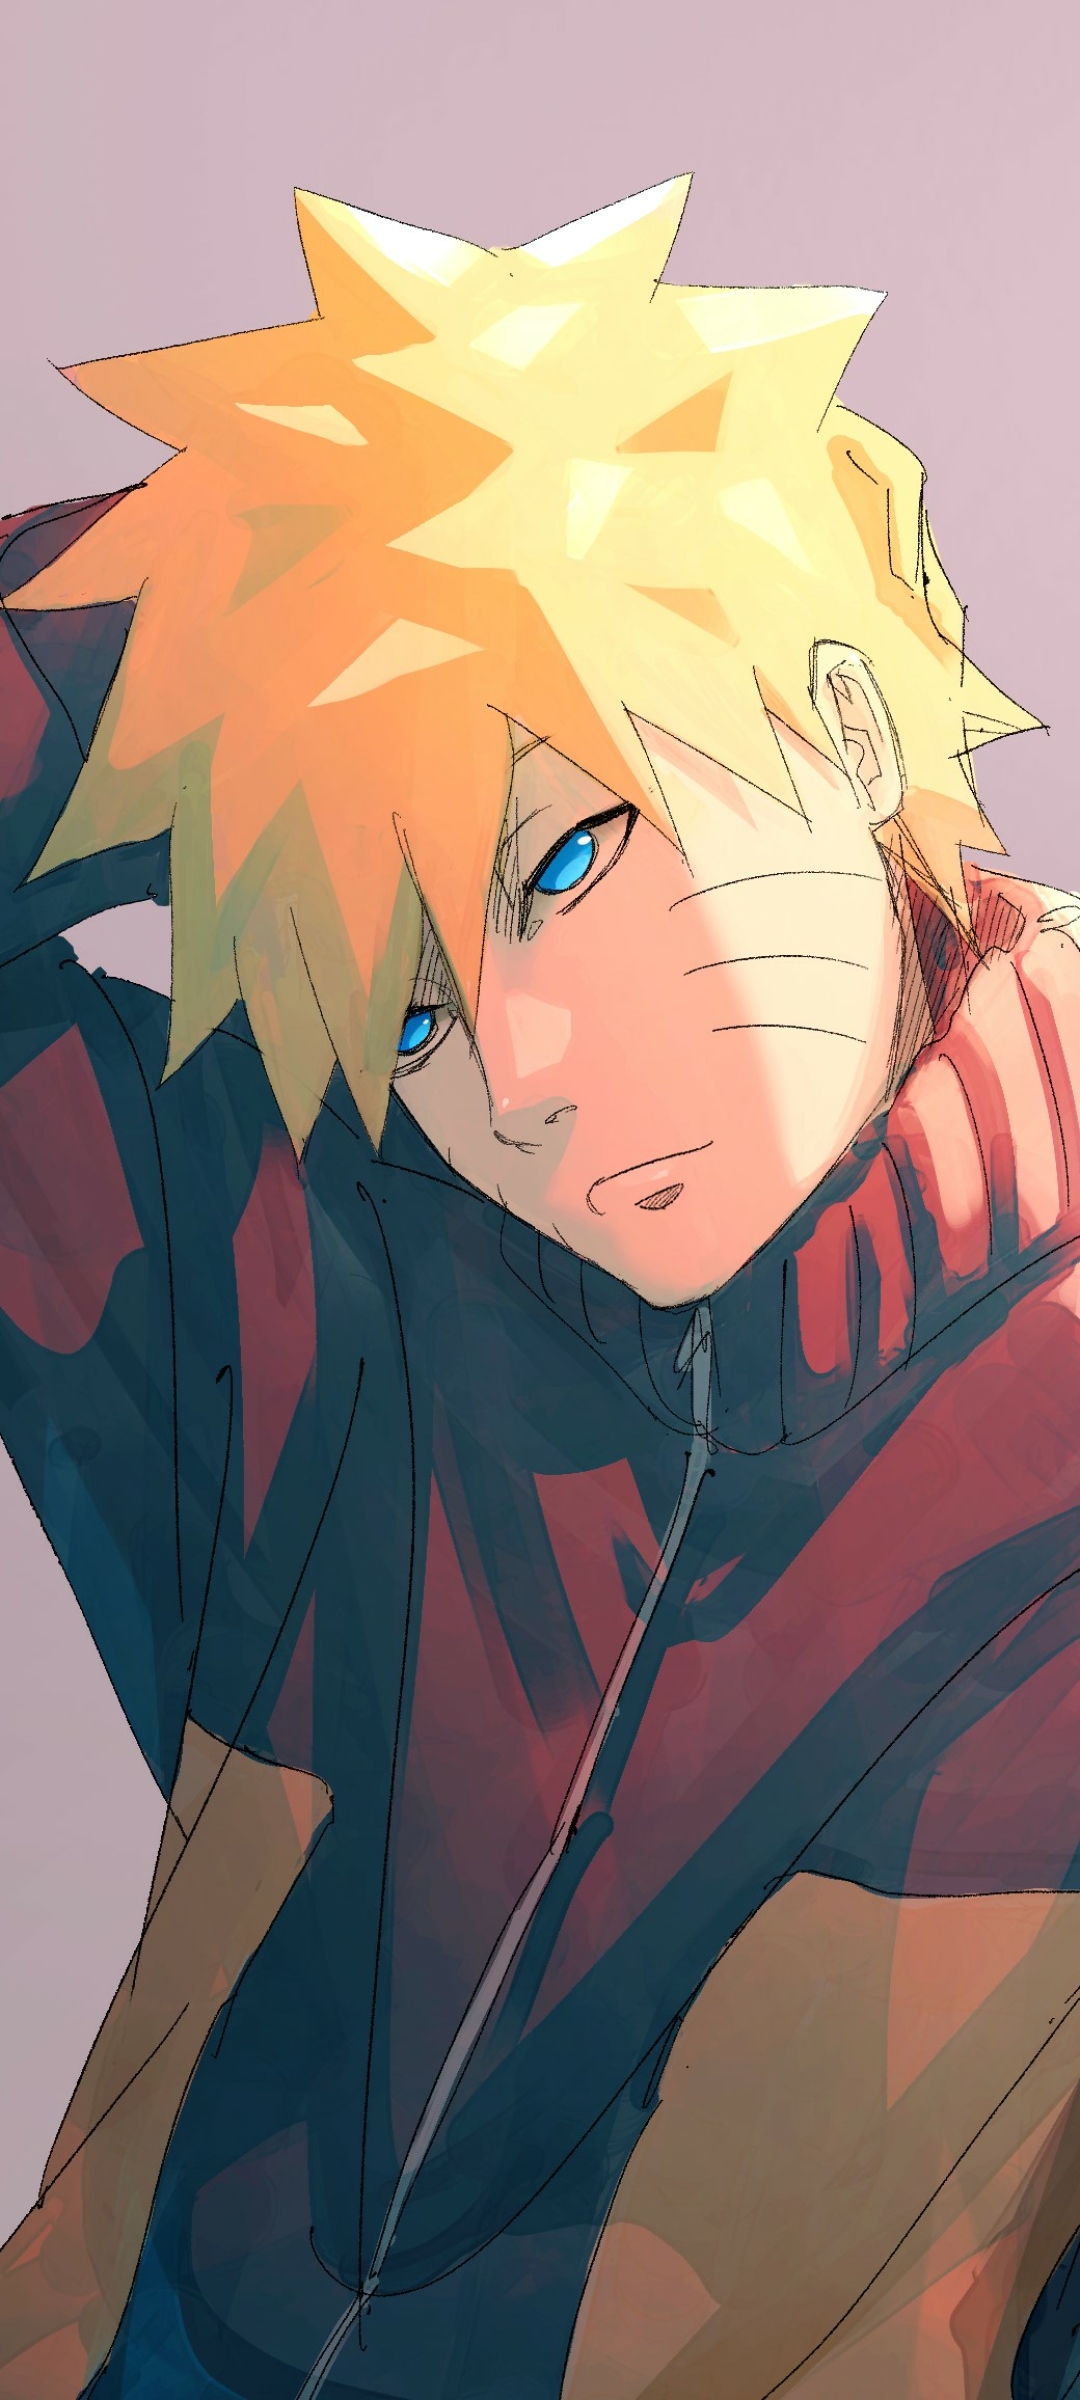 Naruto Uzumaki by しう - Mobile Abyss